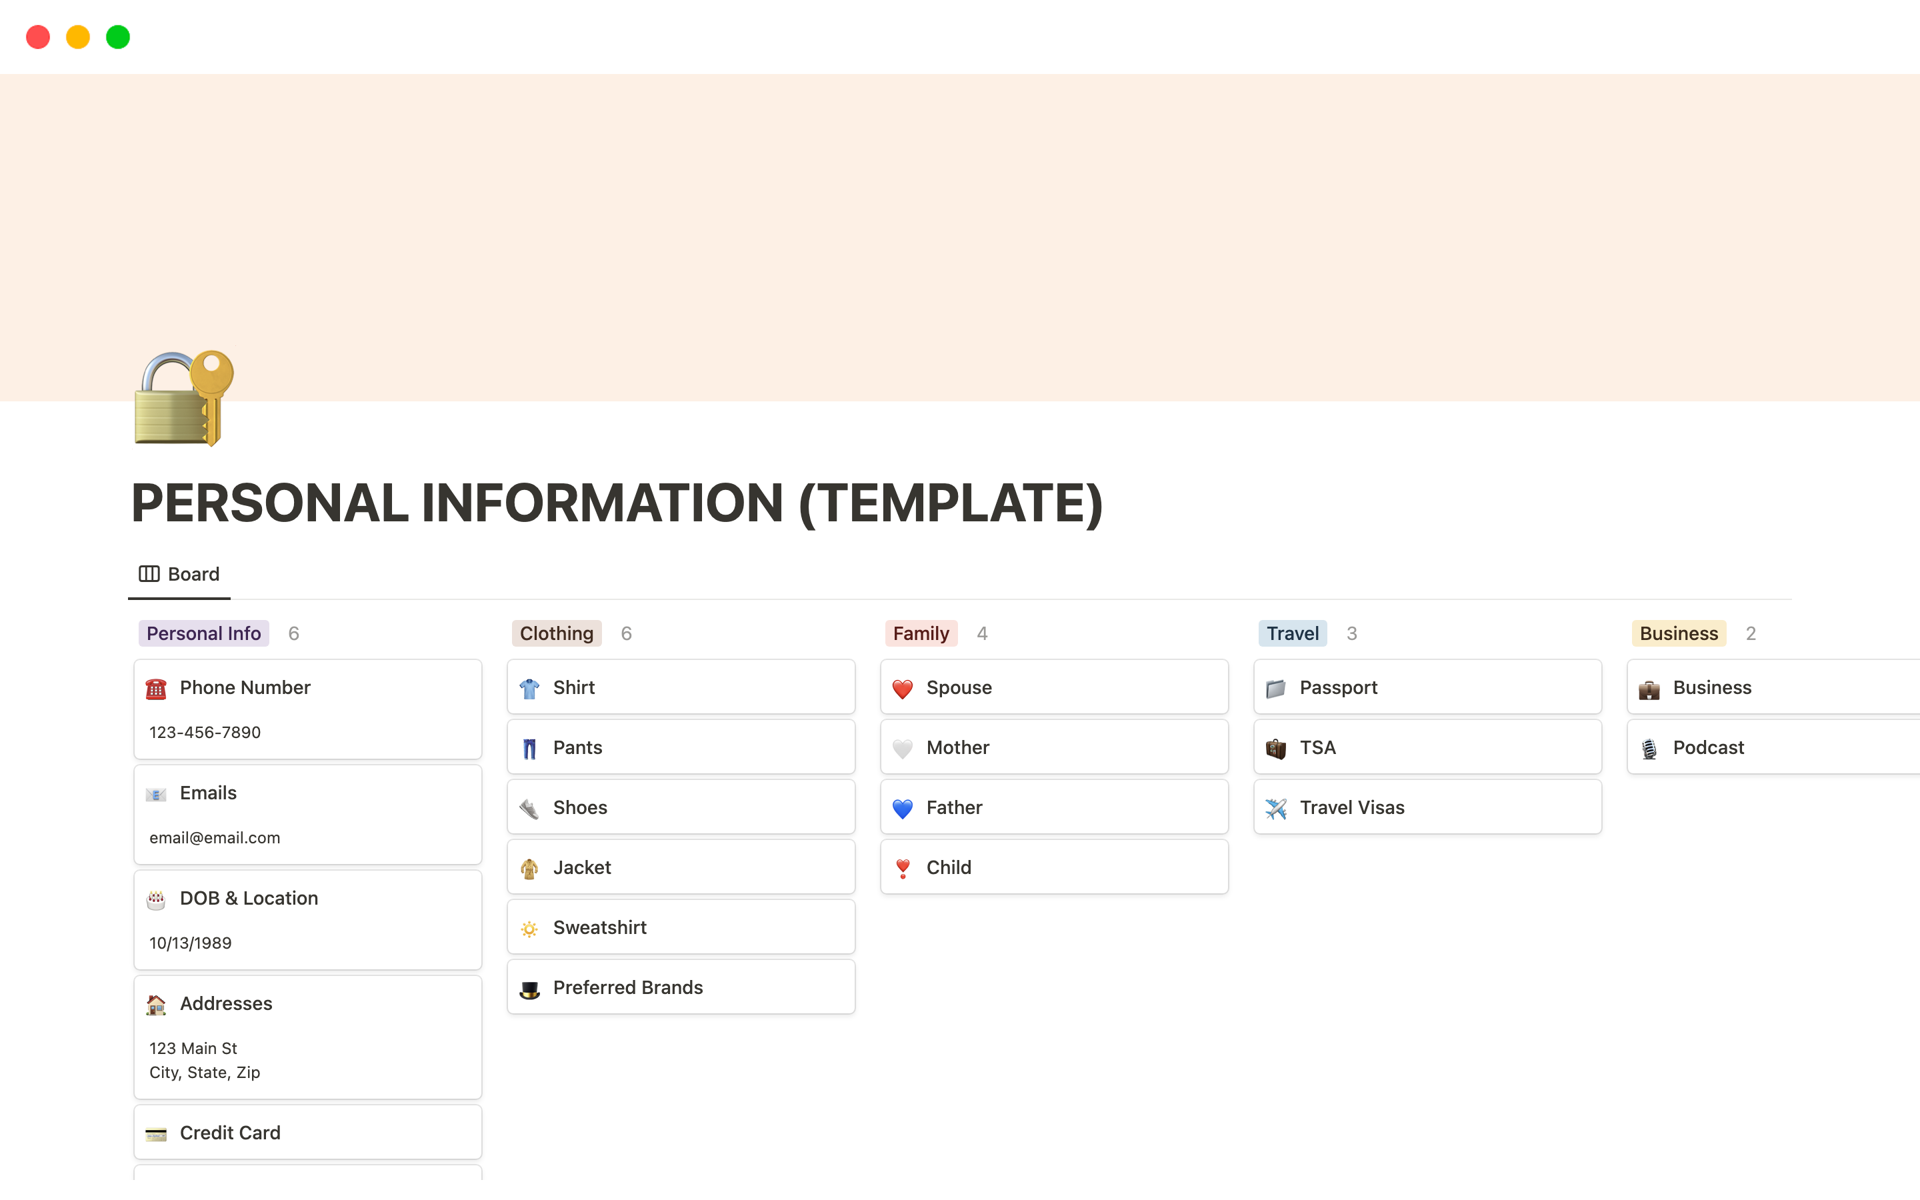 The personal information template simplifies organization by consolidating essential details like clothing sizes, addresses, finances, and more into one easily accessible and customizable layout.